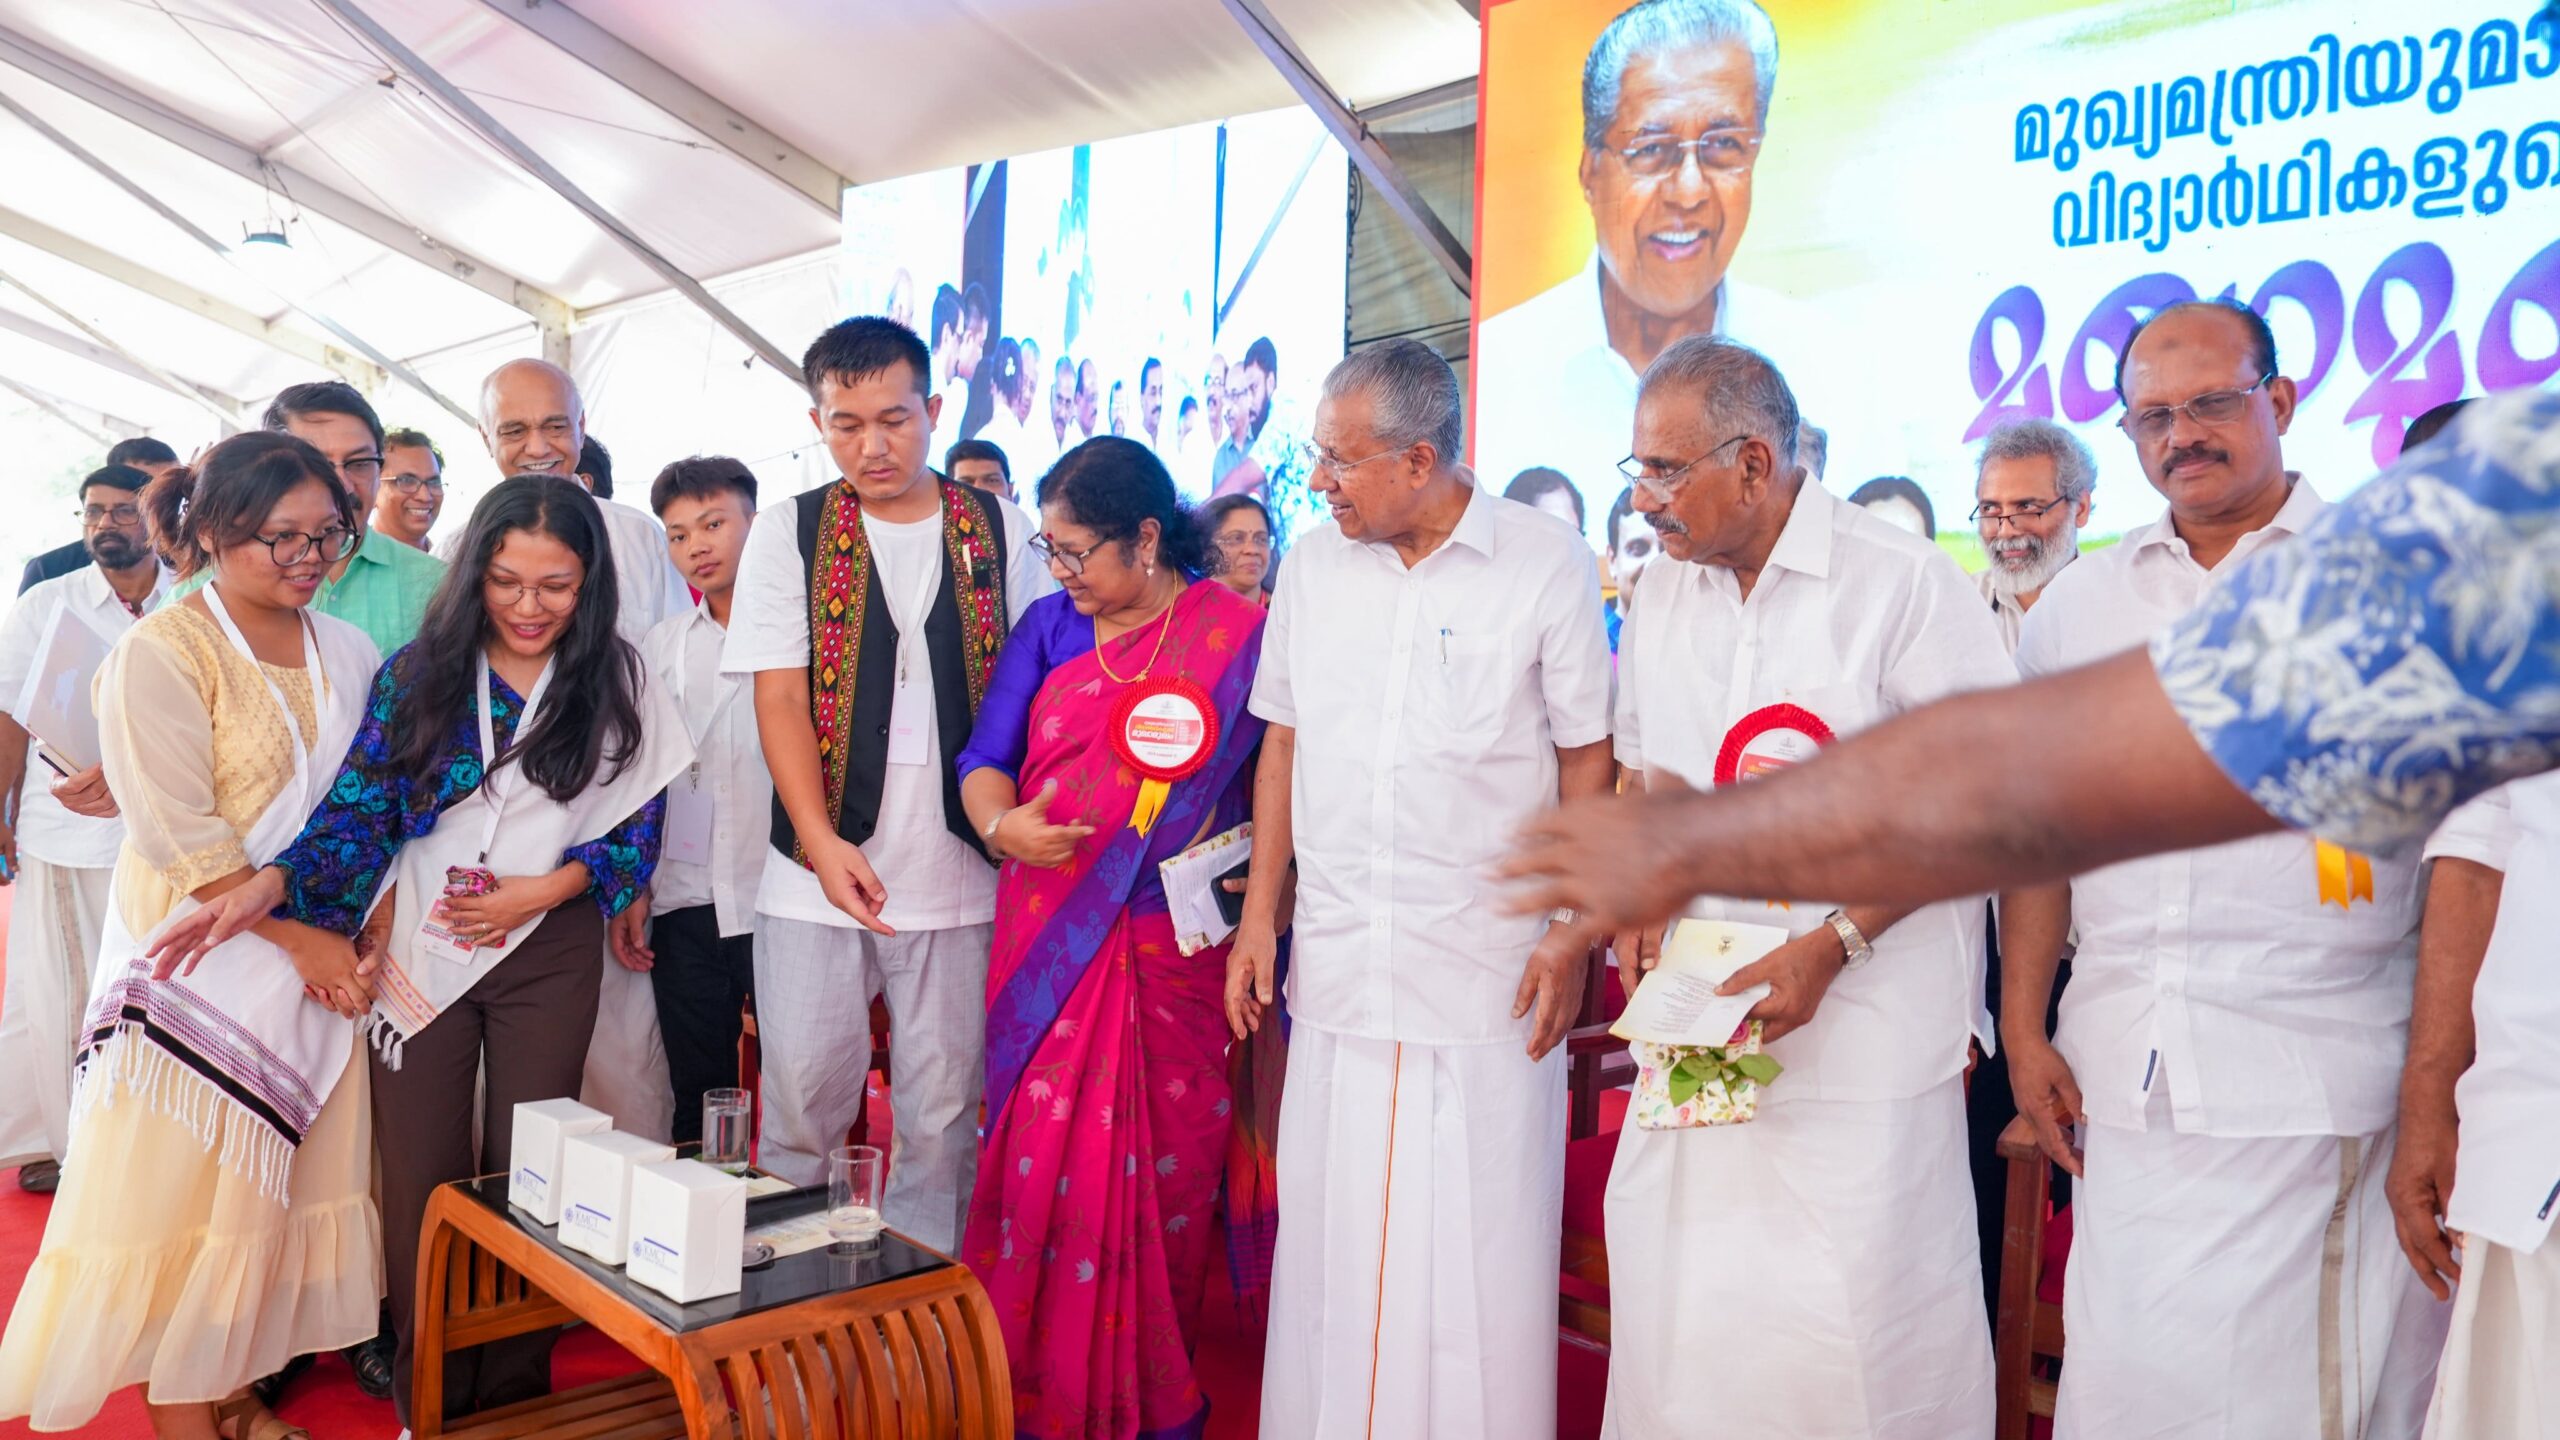 Chief Minister Pinarayi Vijayan urged teachers to adapt to the changing times. In picture, Vijayan and his Cabinet colleagues at an recent event at the Malabar Christian College, Kozhikode. (X)